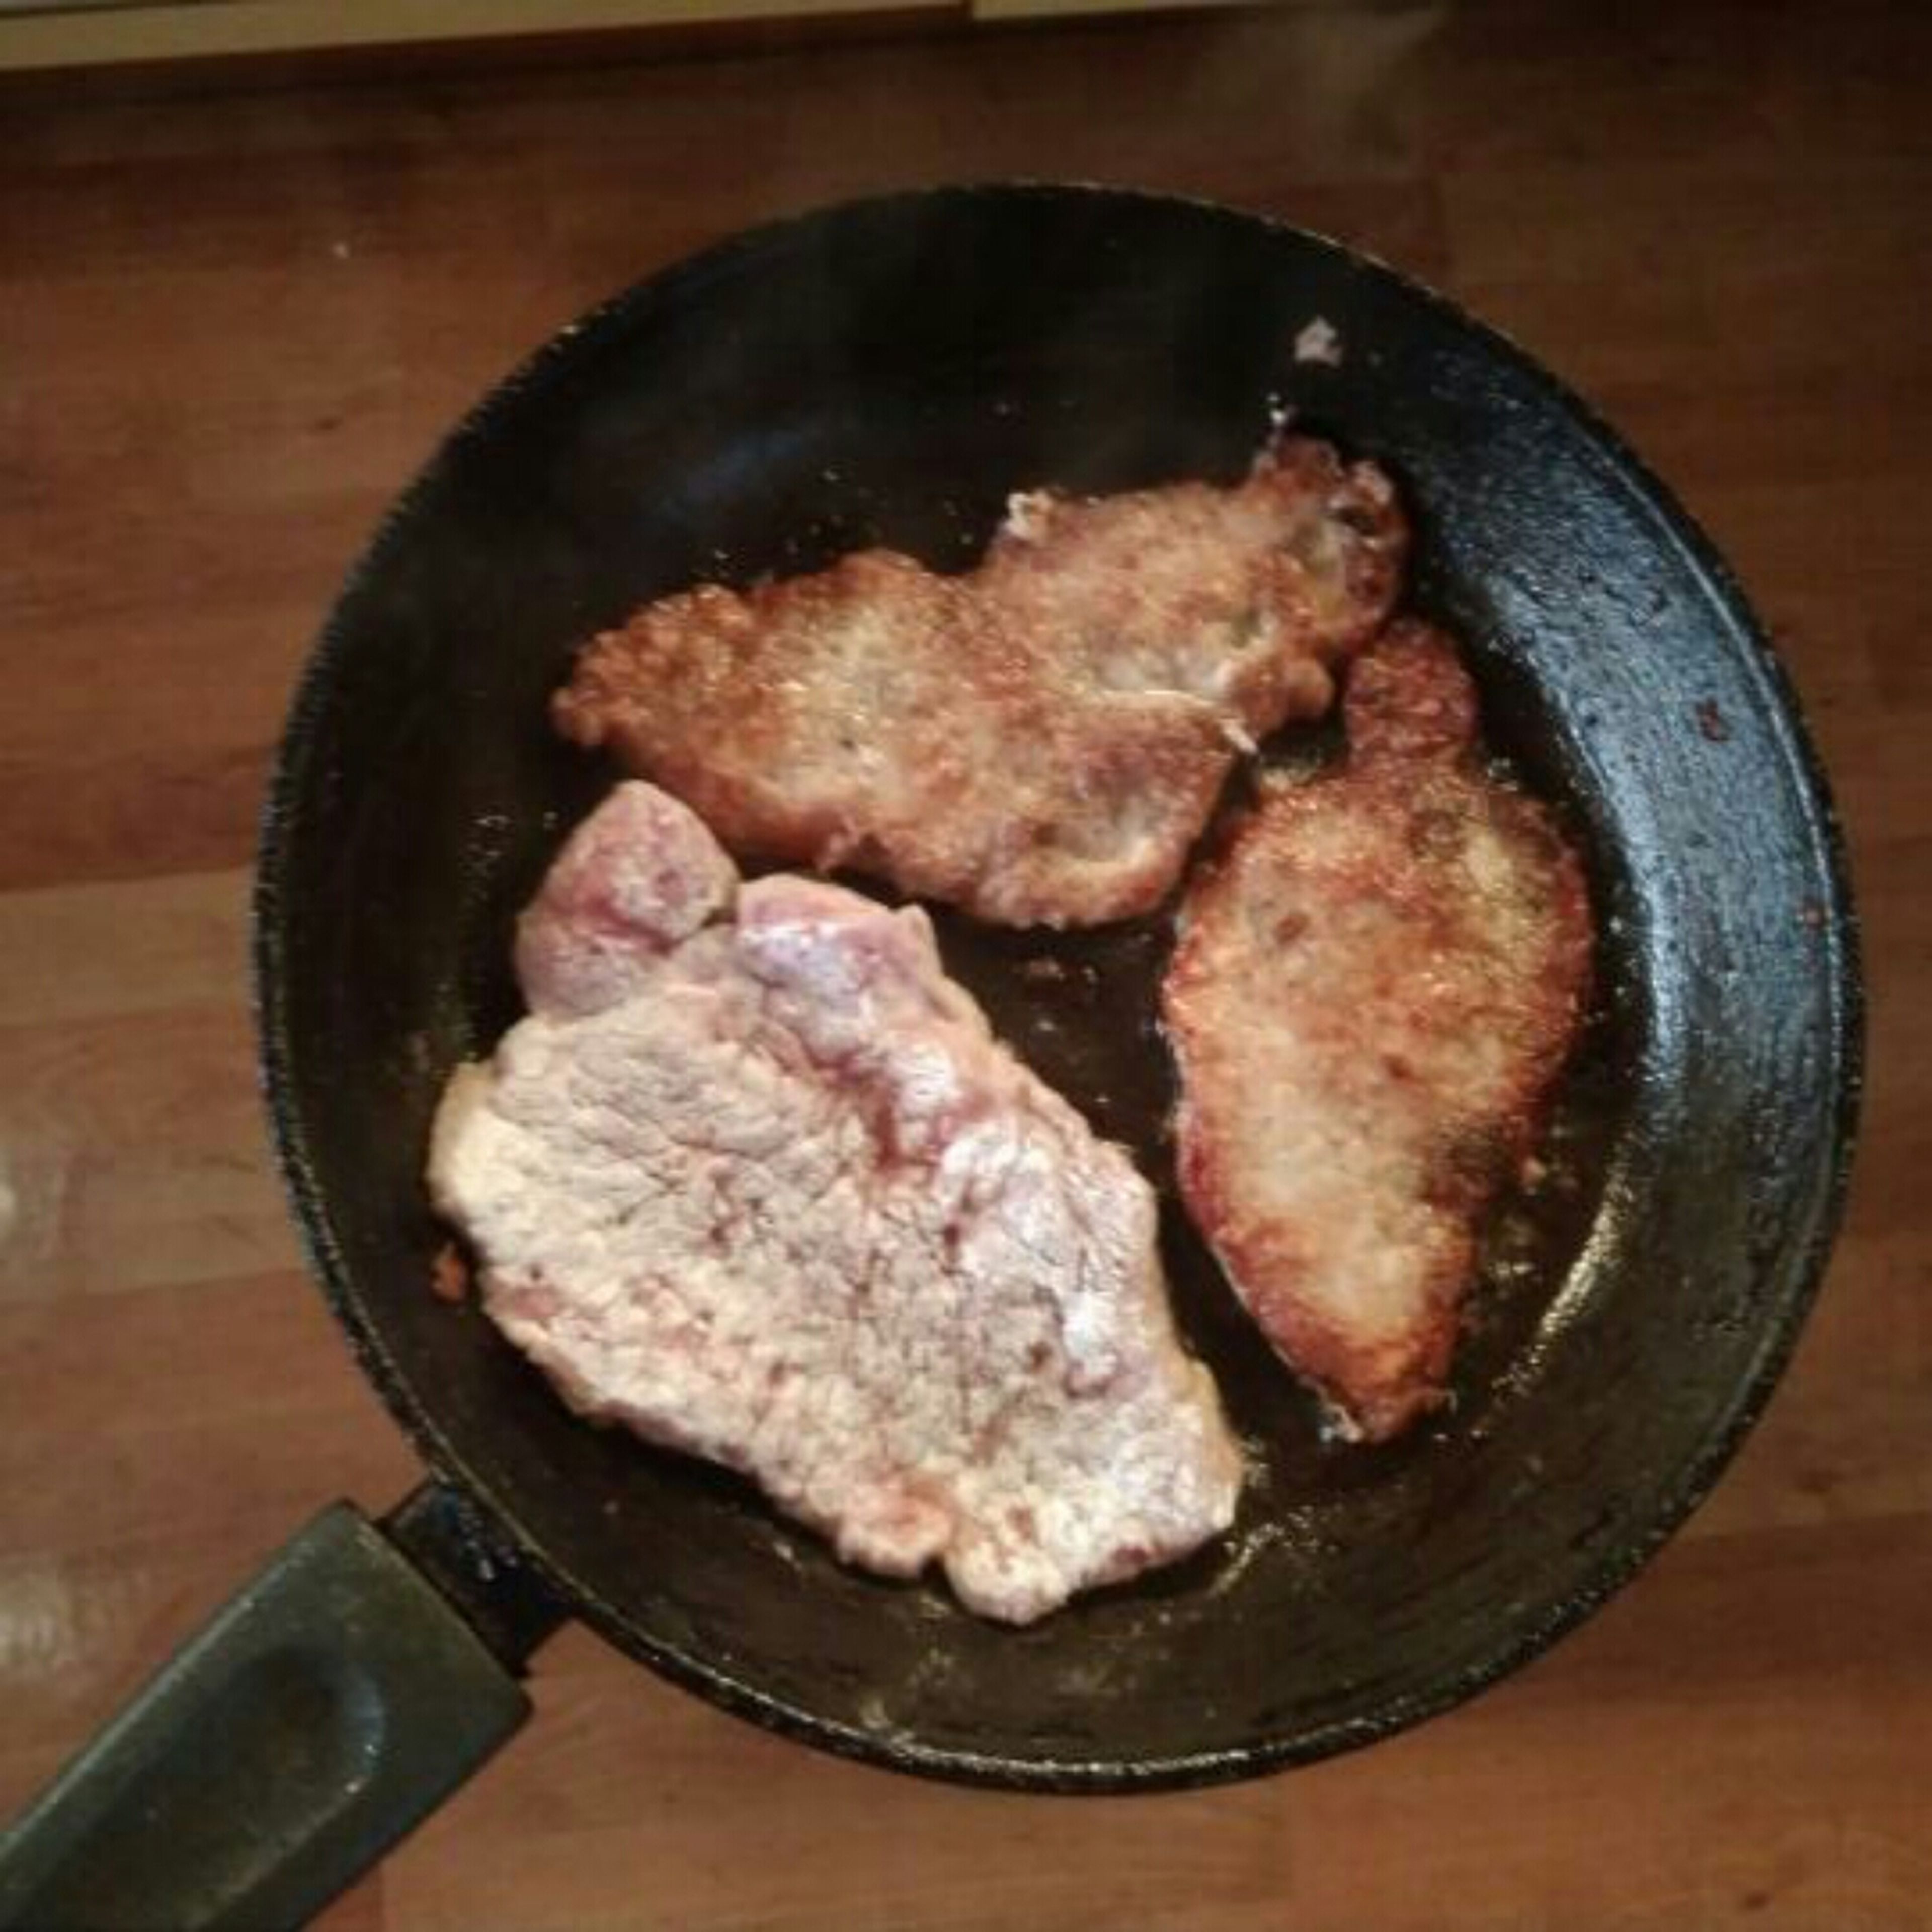 Meanwhile, fry the first slice of meat in a pan.